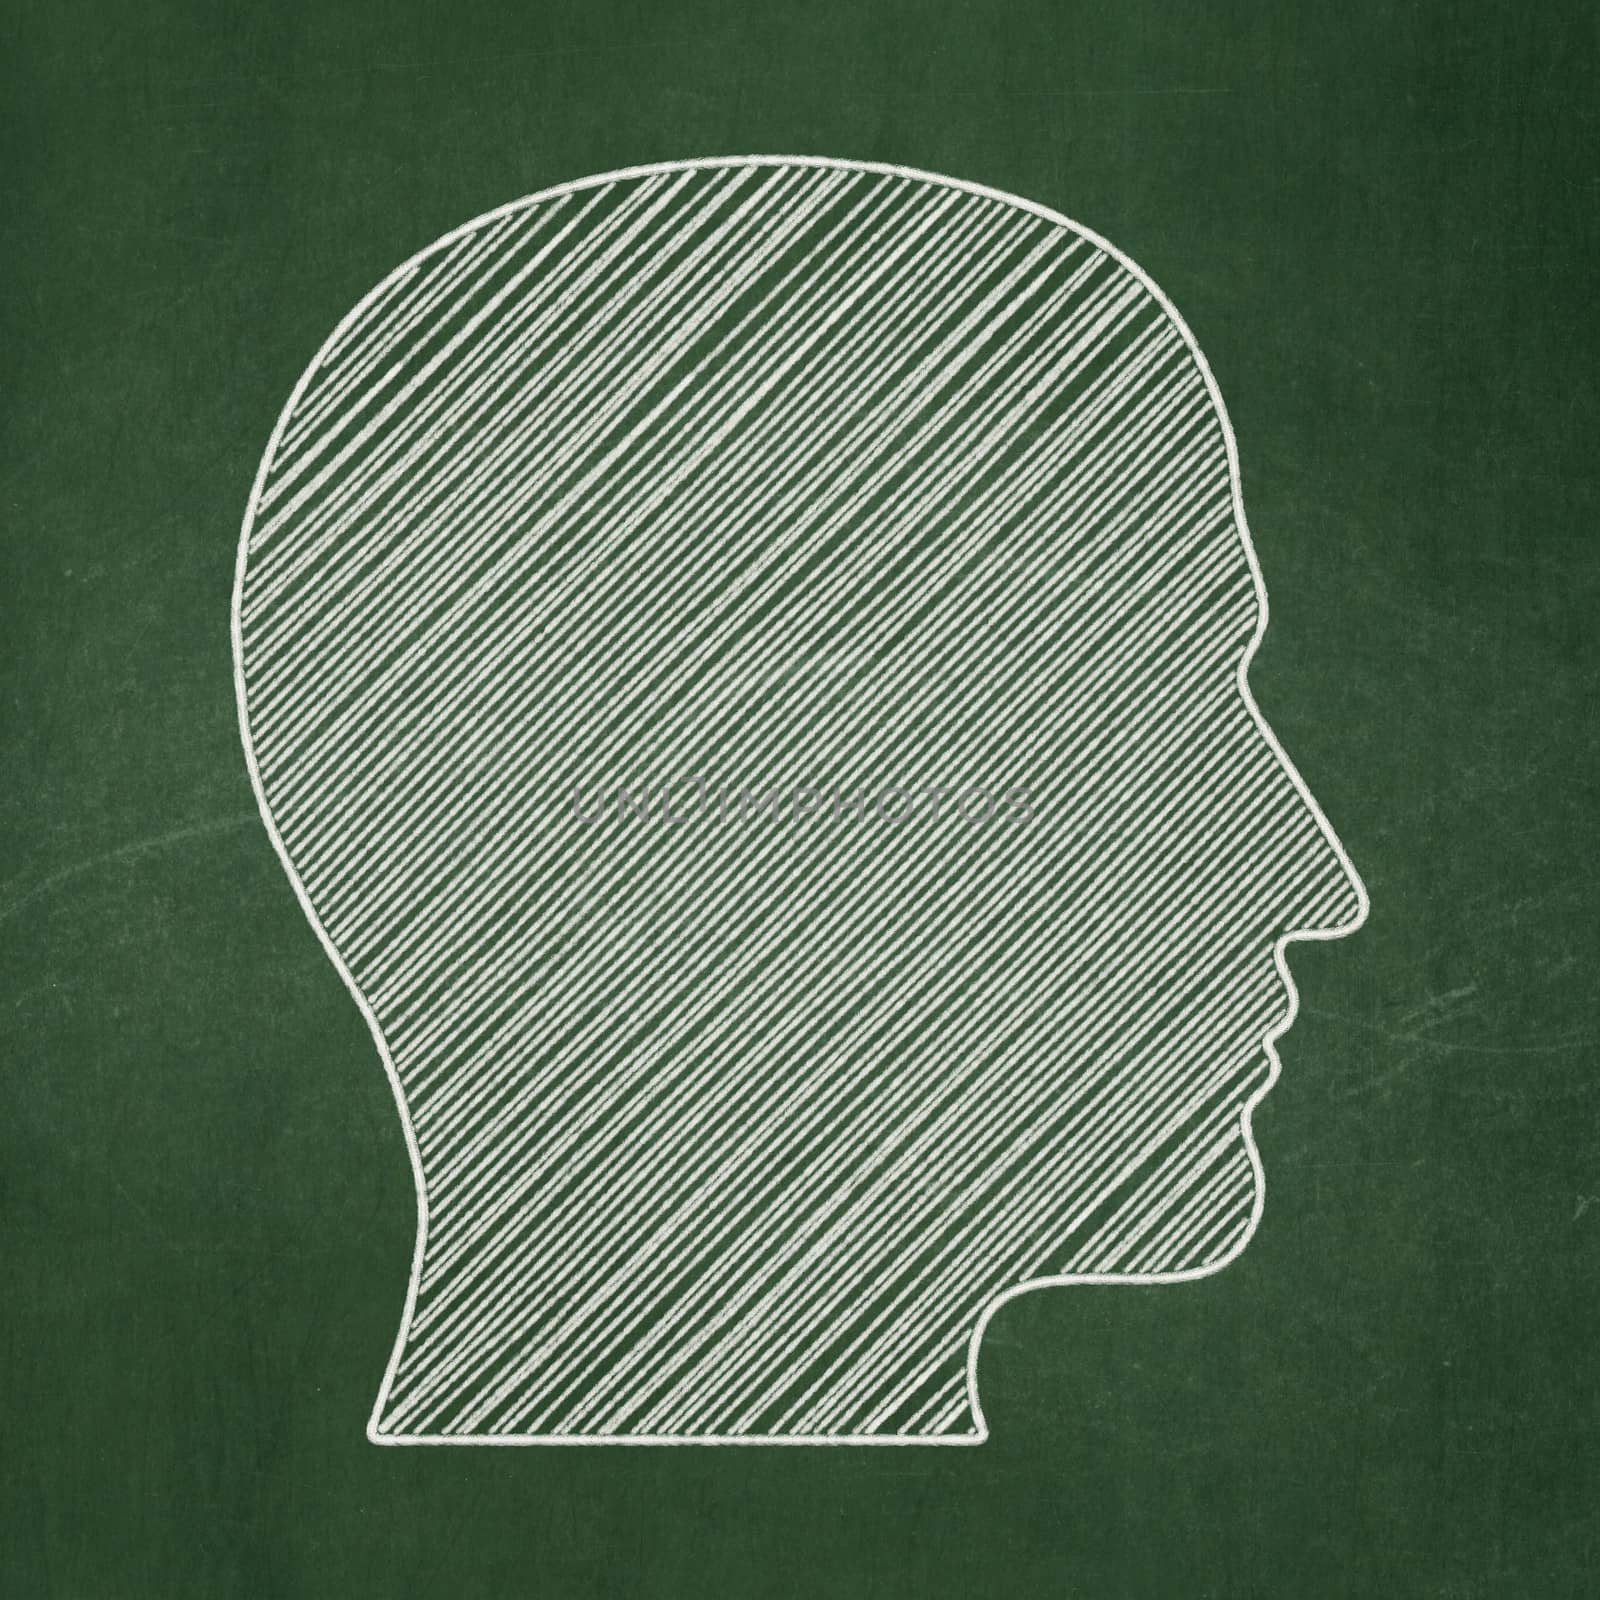 Education concept: Head icon on Green chalkboard background, 3d render